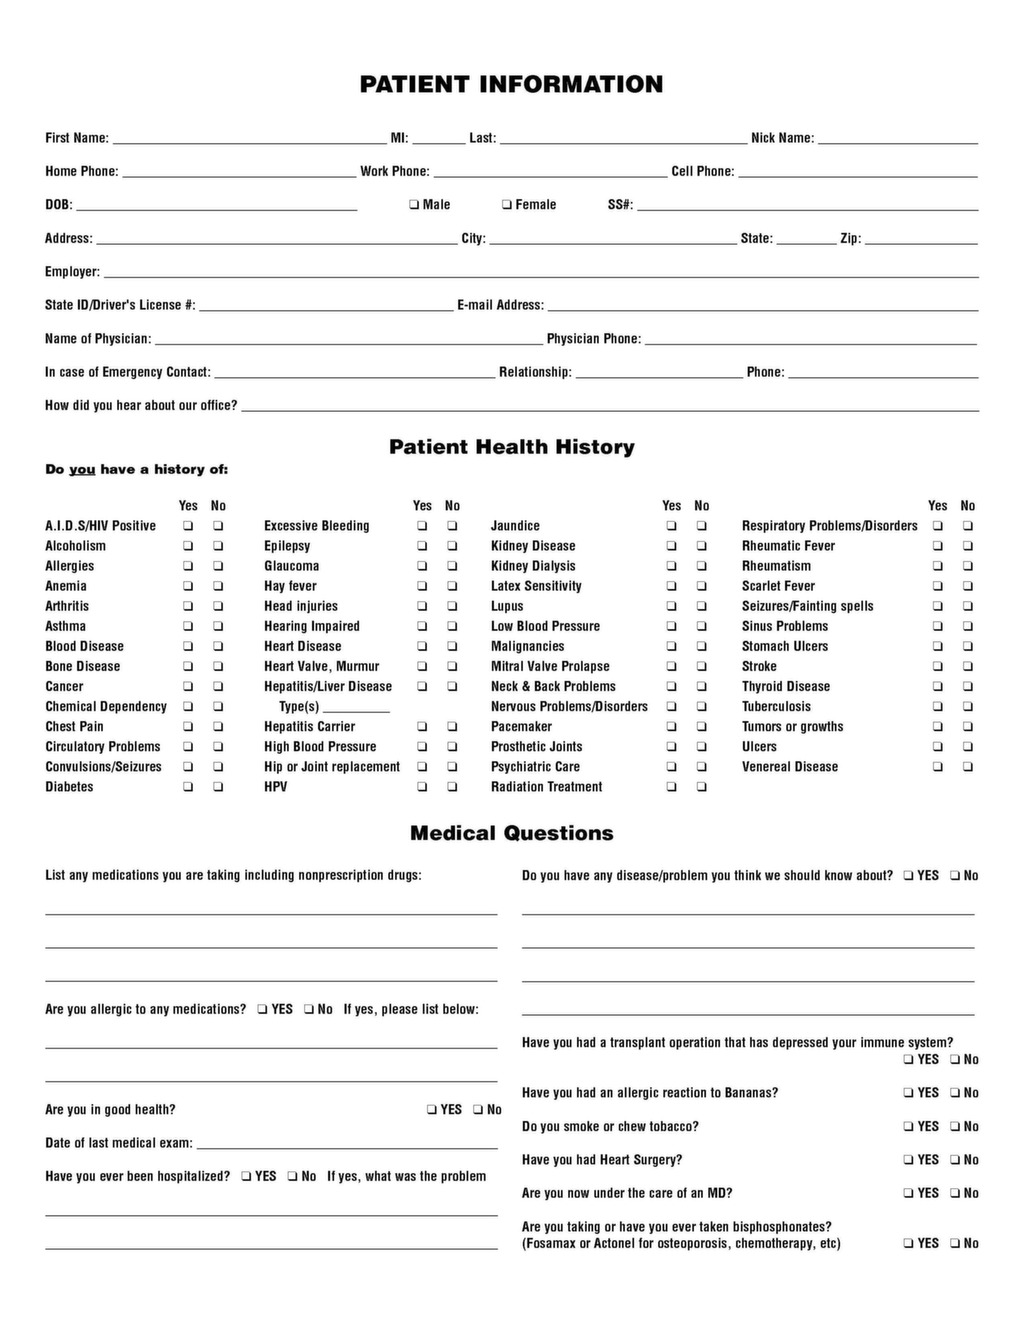 printable-dental-patient-information-forms-printable-forms-free-online